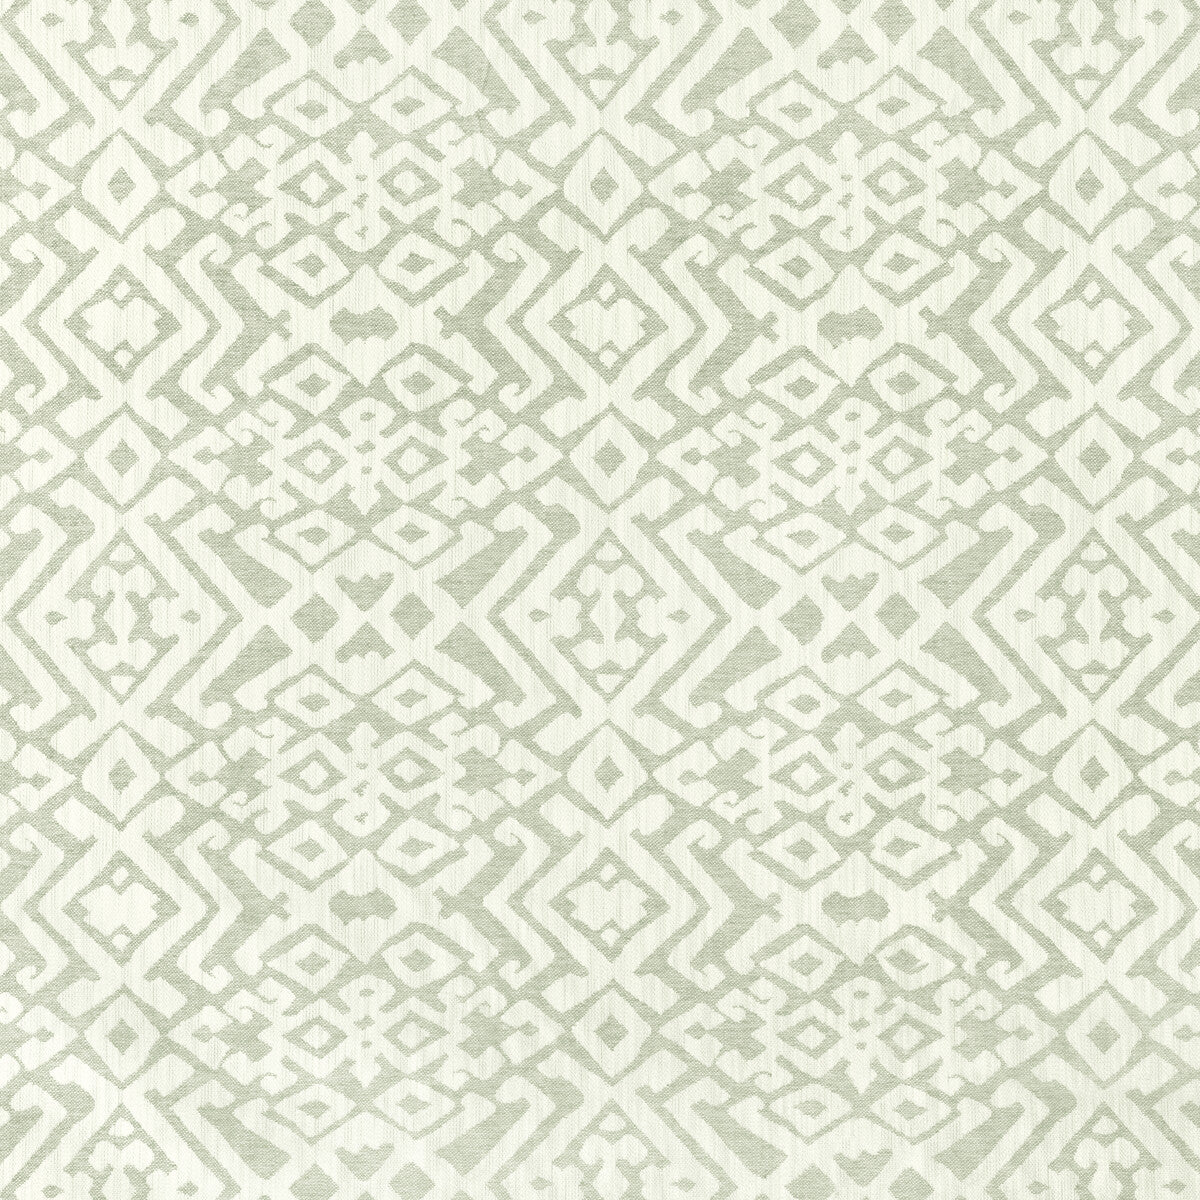 Springbok fabric in sage color - pattern 36874.130.0 - by Kravet Couture in the Atelier Weaves collection